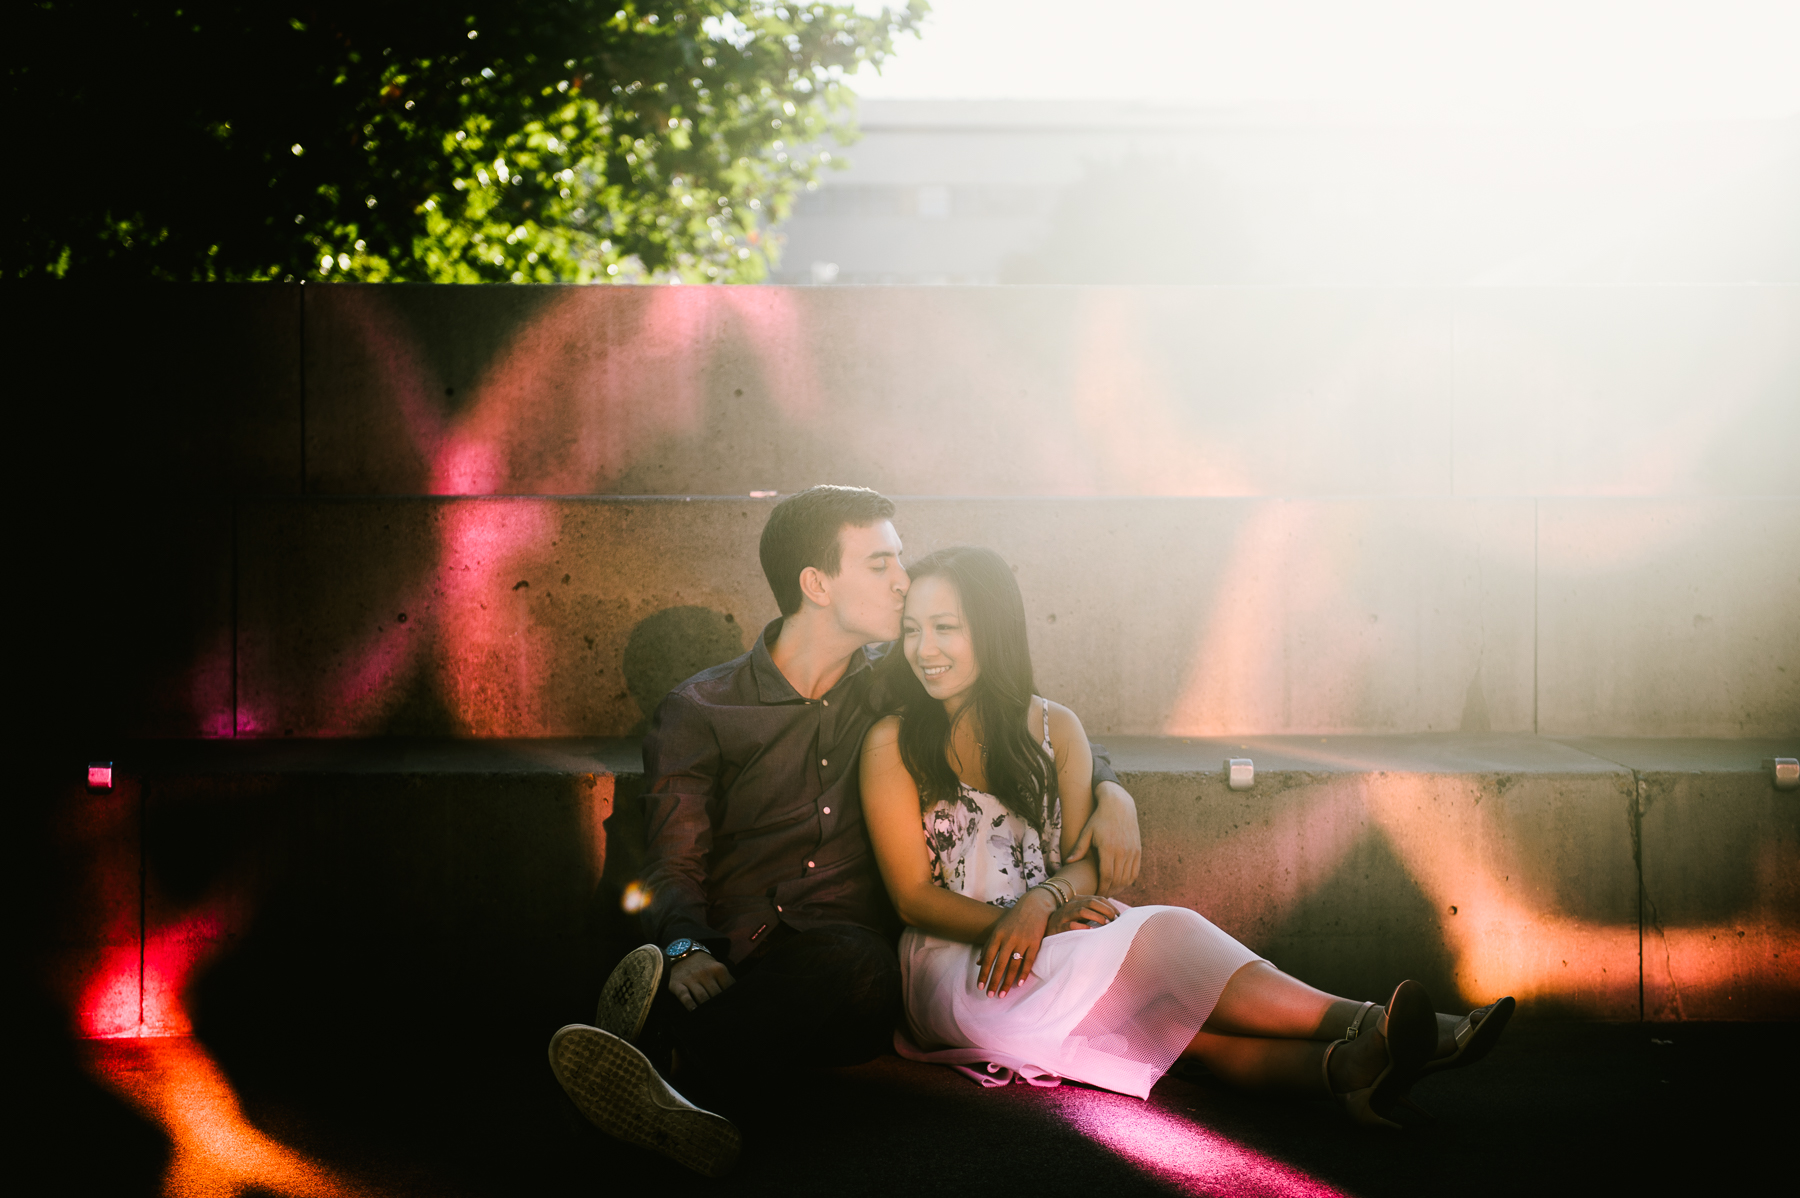 seattle-wedding-photographer-engagement-sessions-best-2